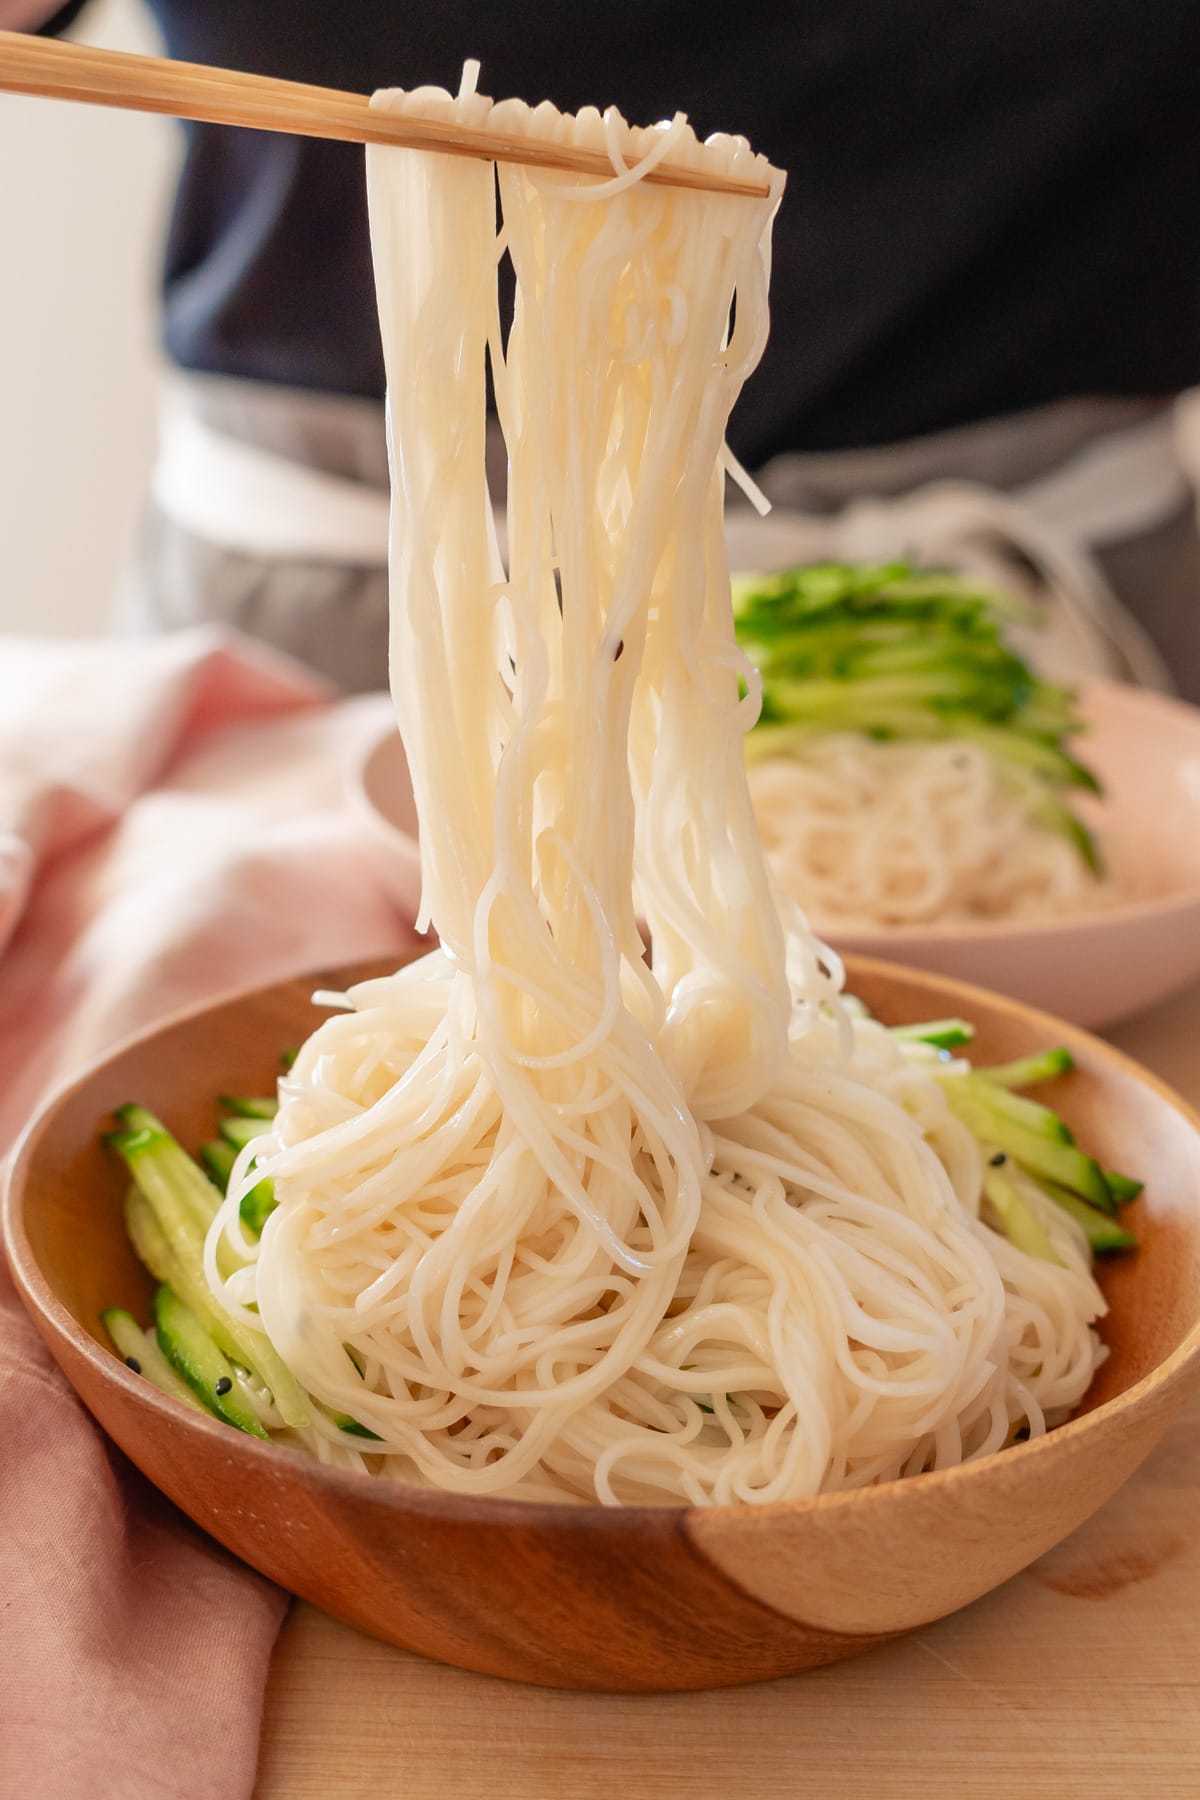 Long noodles being pulled upward from a wood serving bowl with chopsticks.